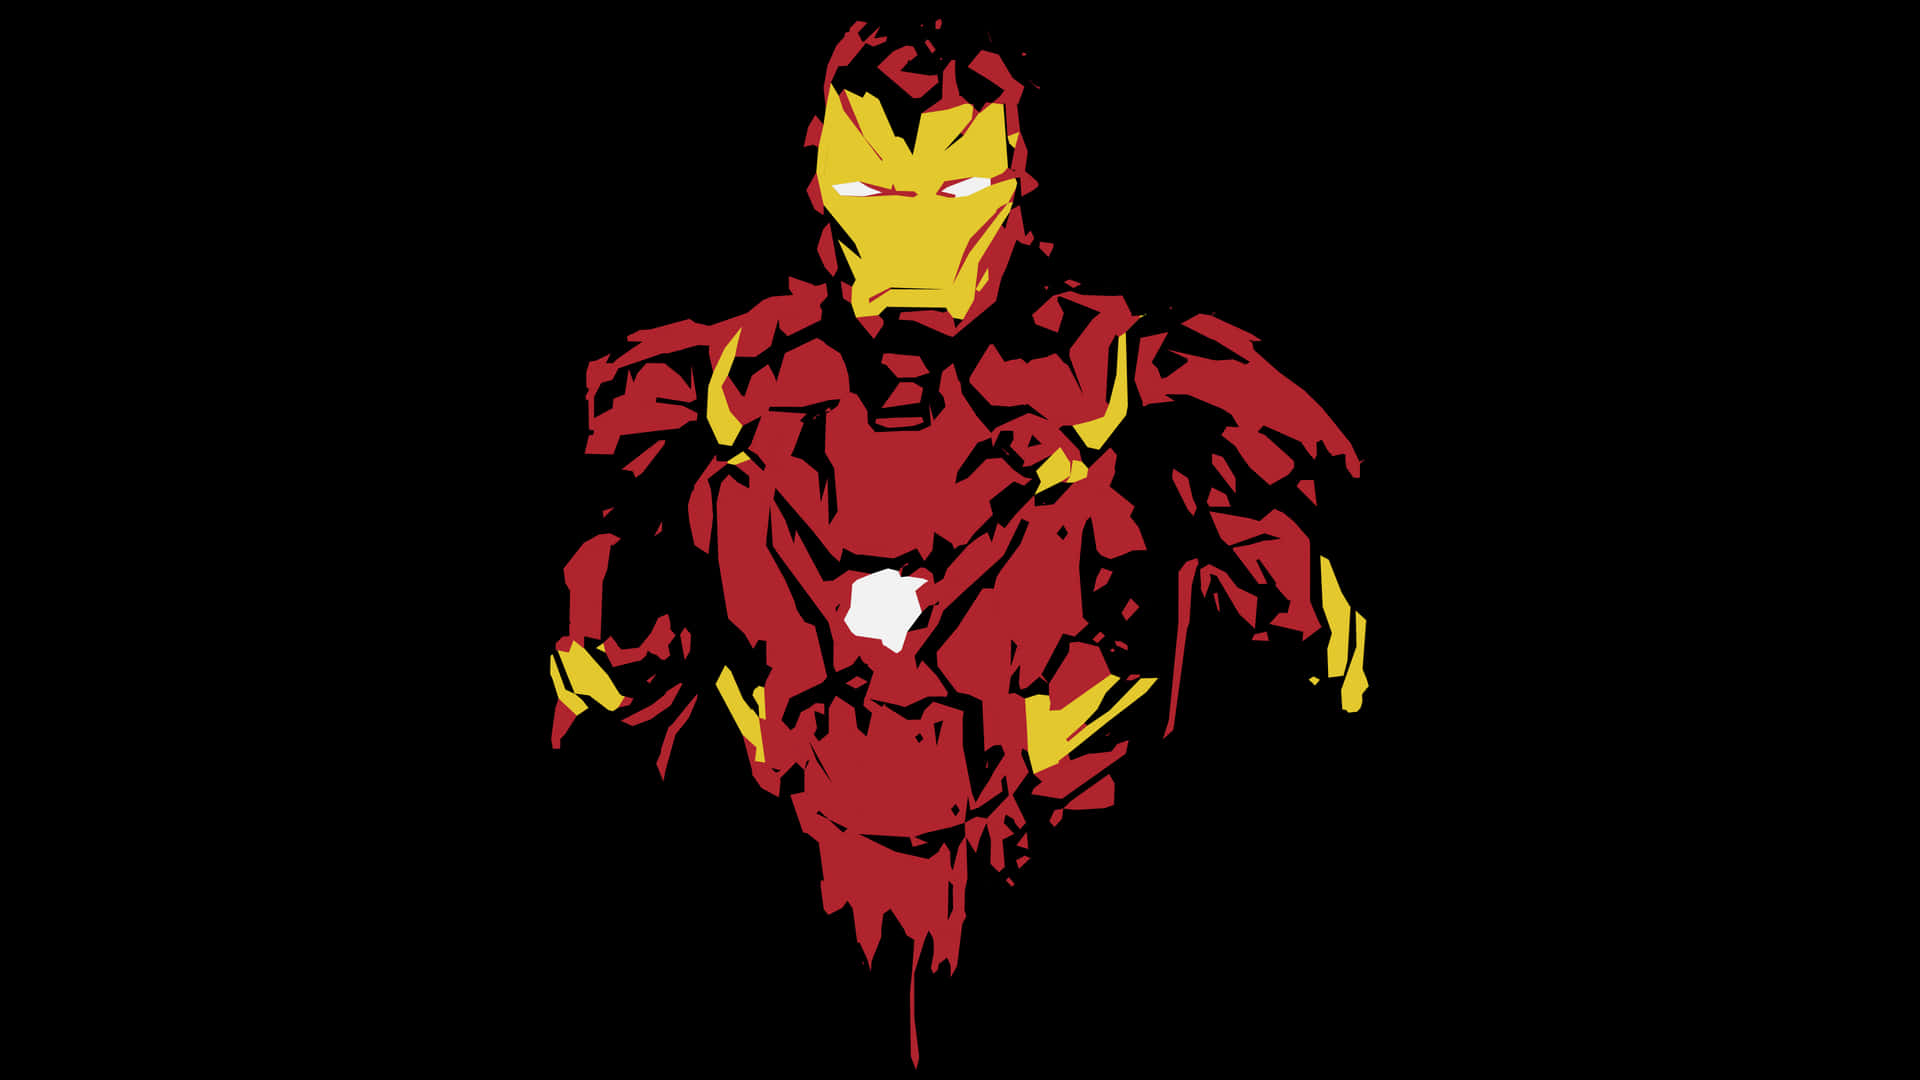 Explore the Marvel Cinematic Universe with your favorite superheroes. Wallpaper